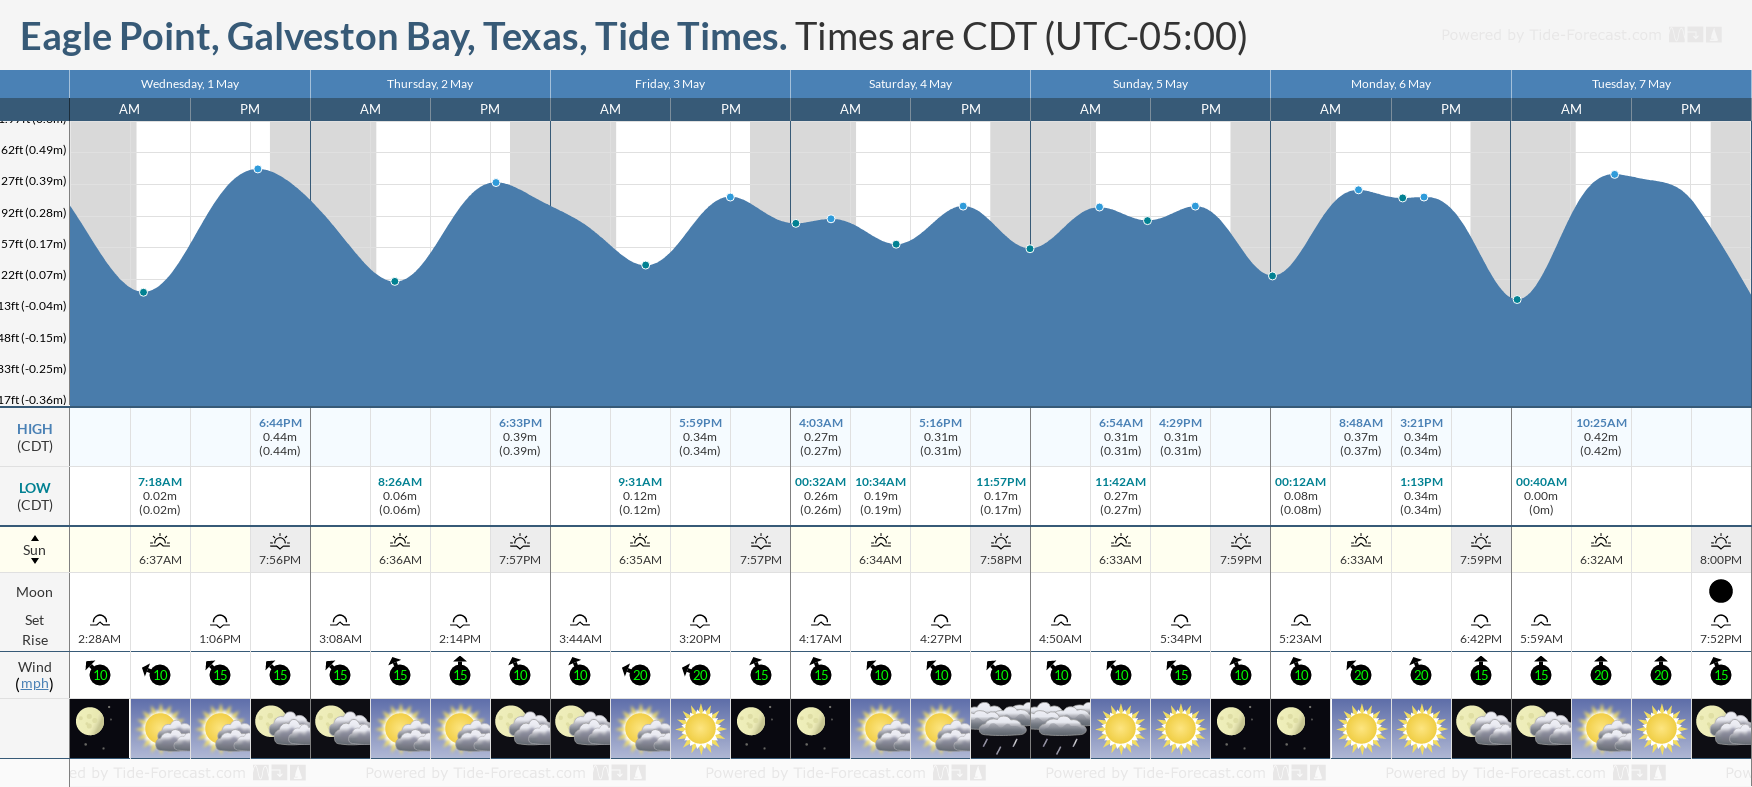 Eagle Point, Galveston Bay, Texas Tide Chart including high and low tide times for the next 7 days